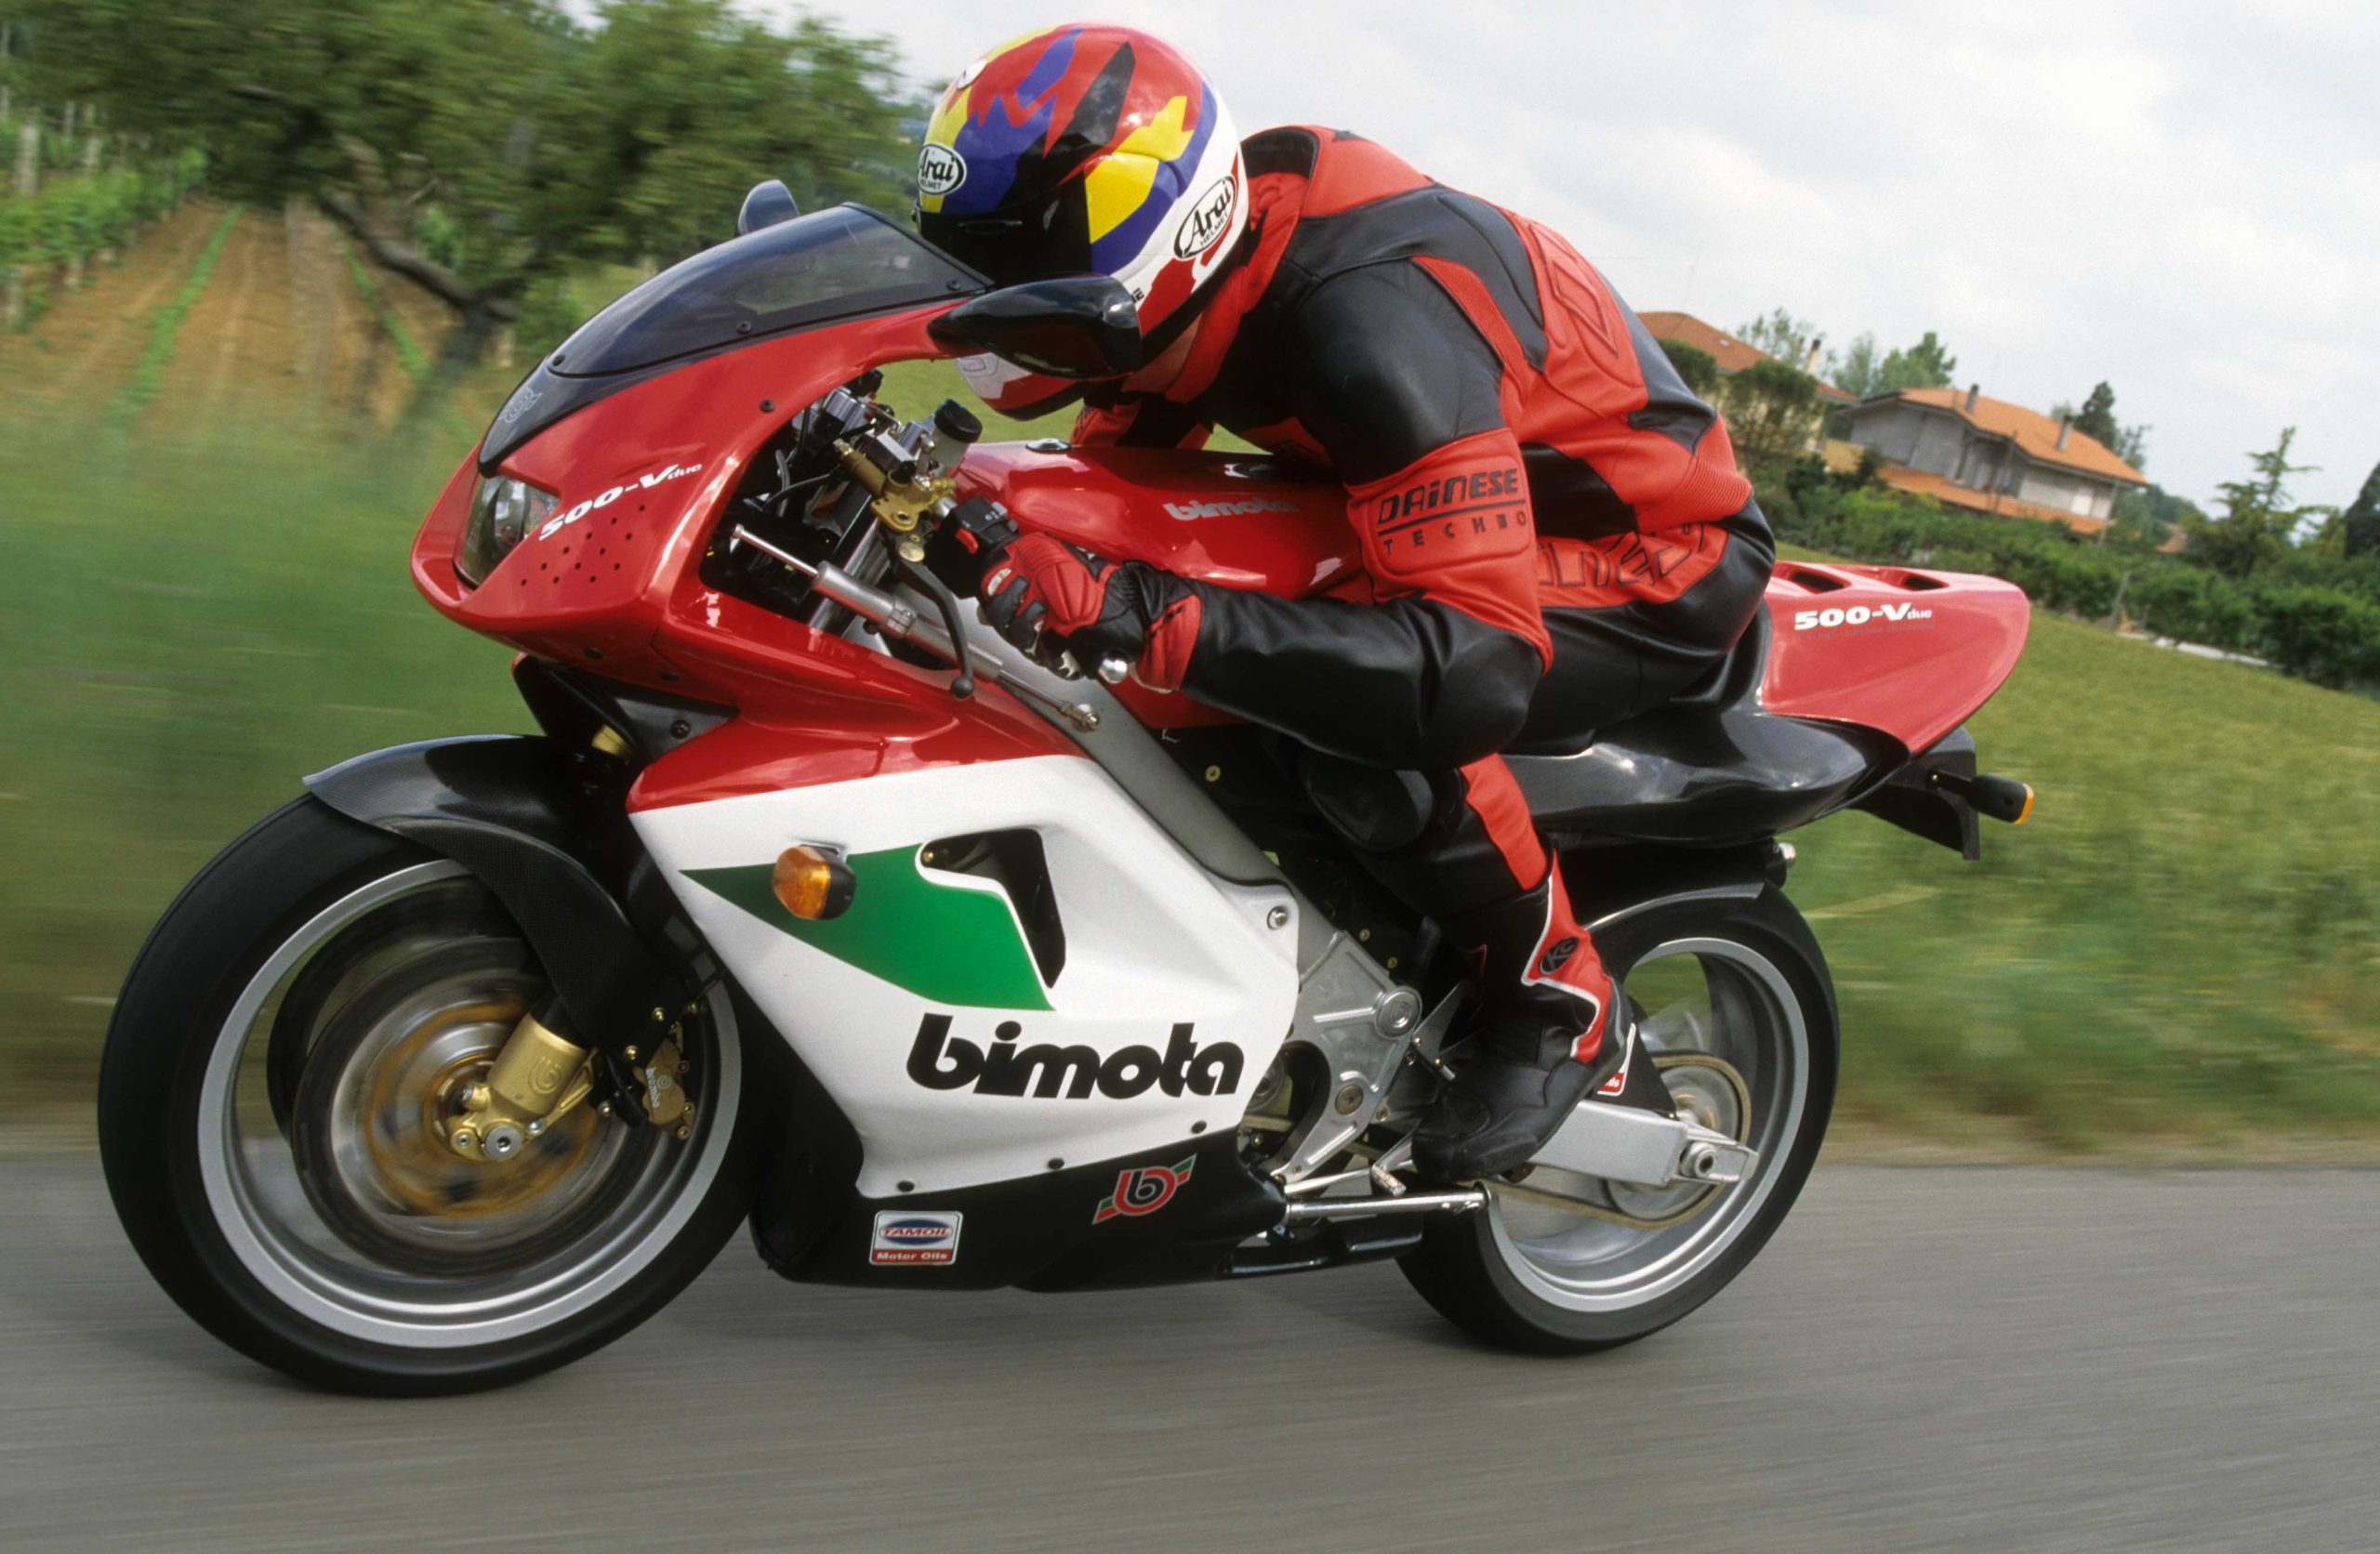 After Cloudy Skies, the Sun Is Shining on Bimota Once More